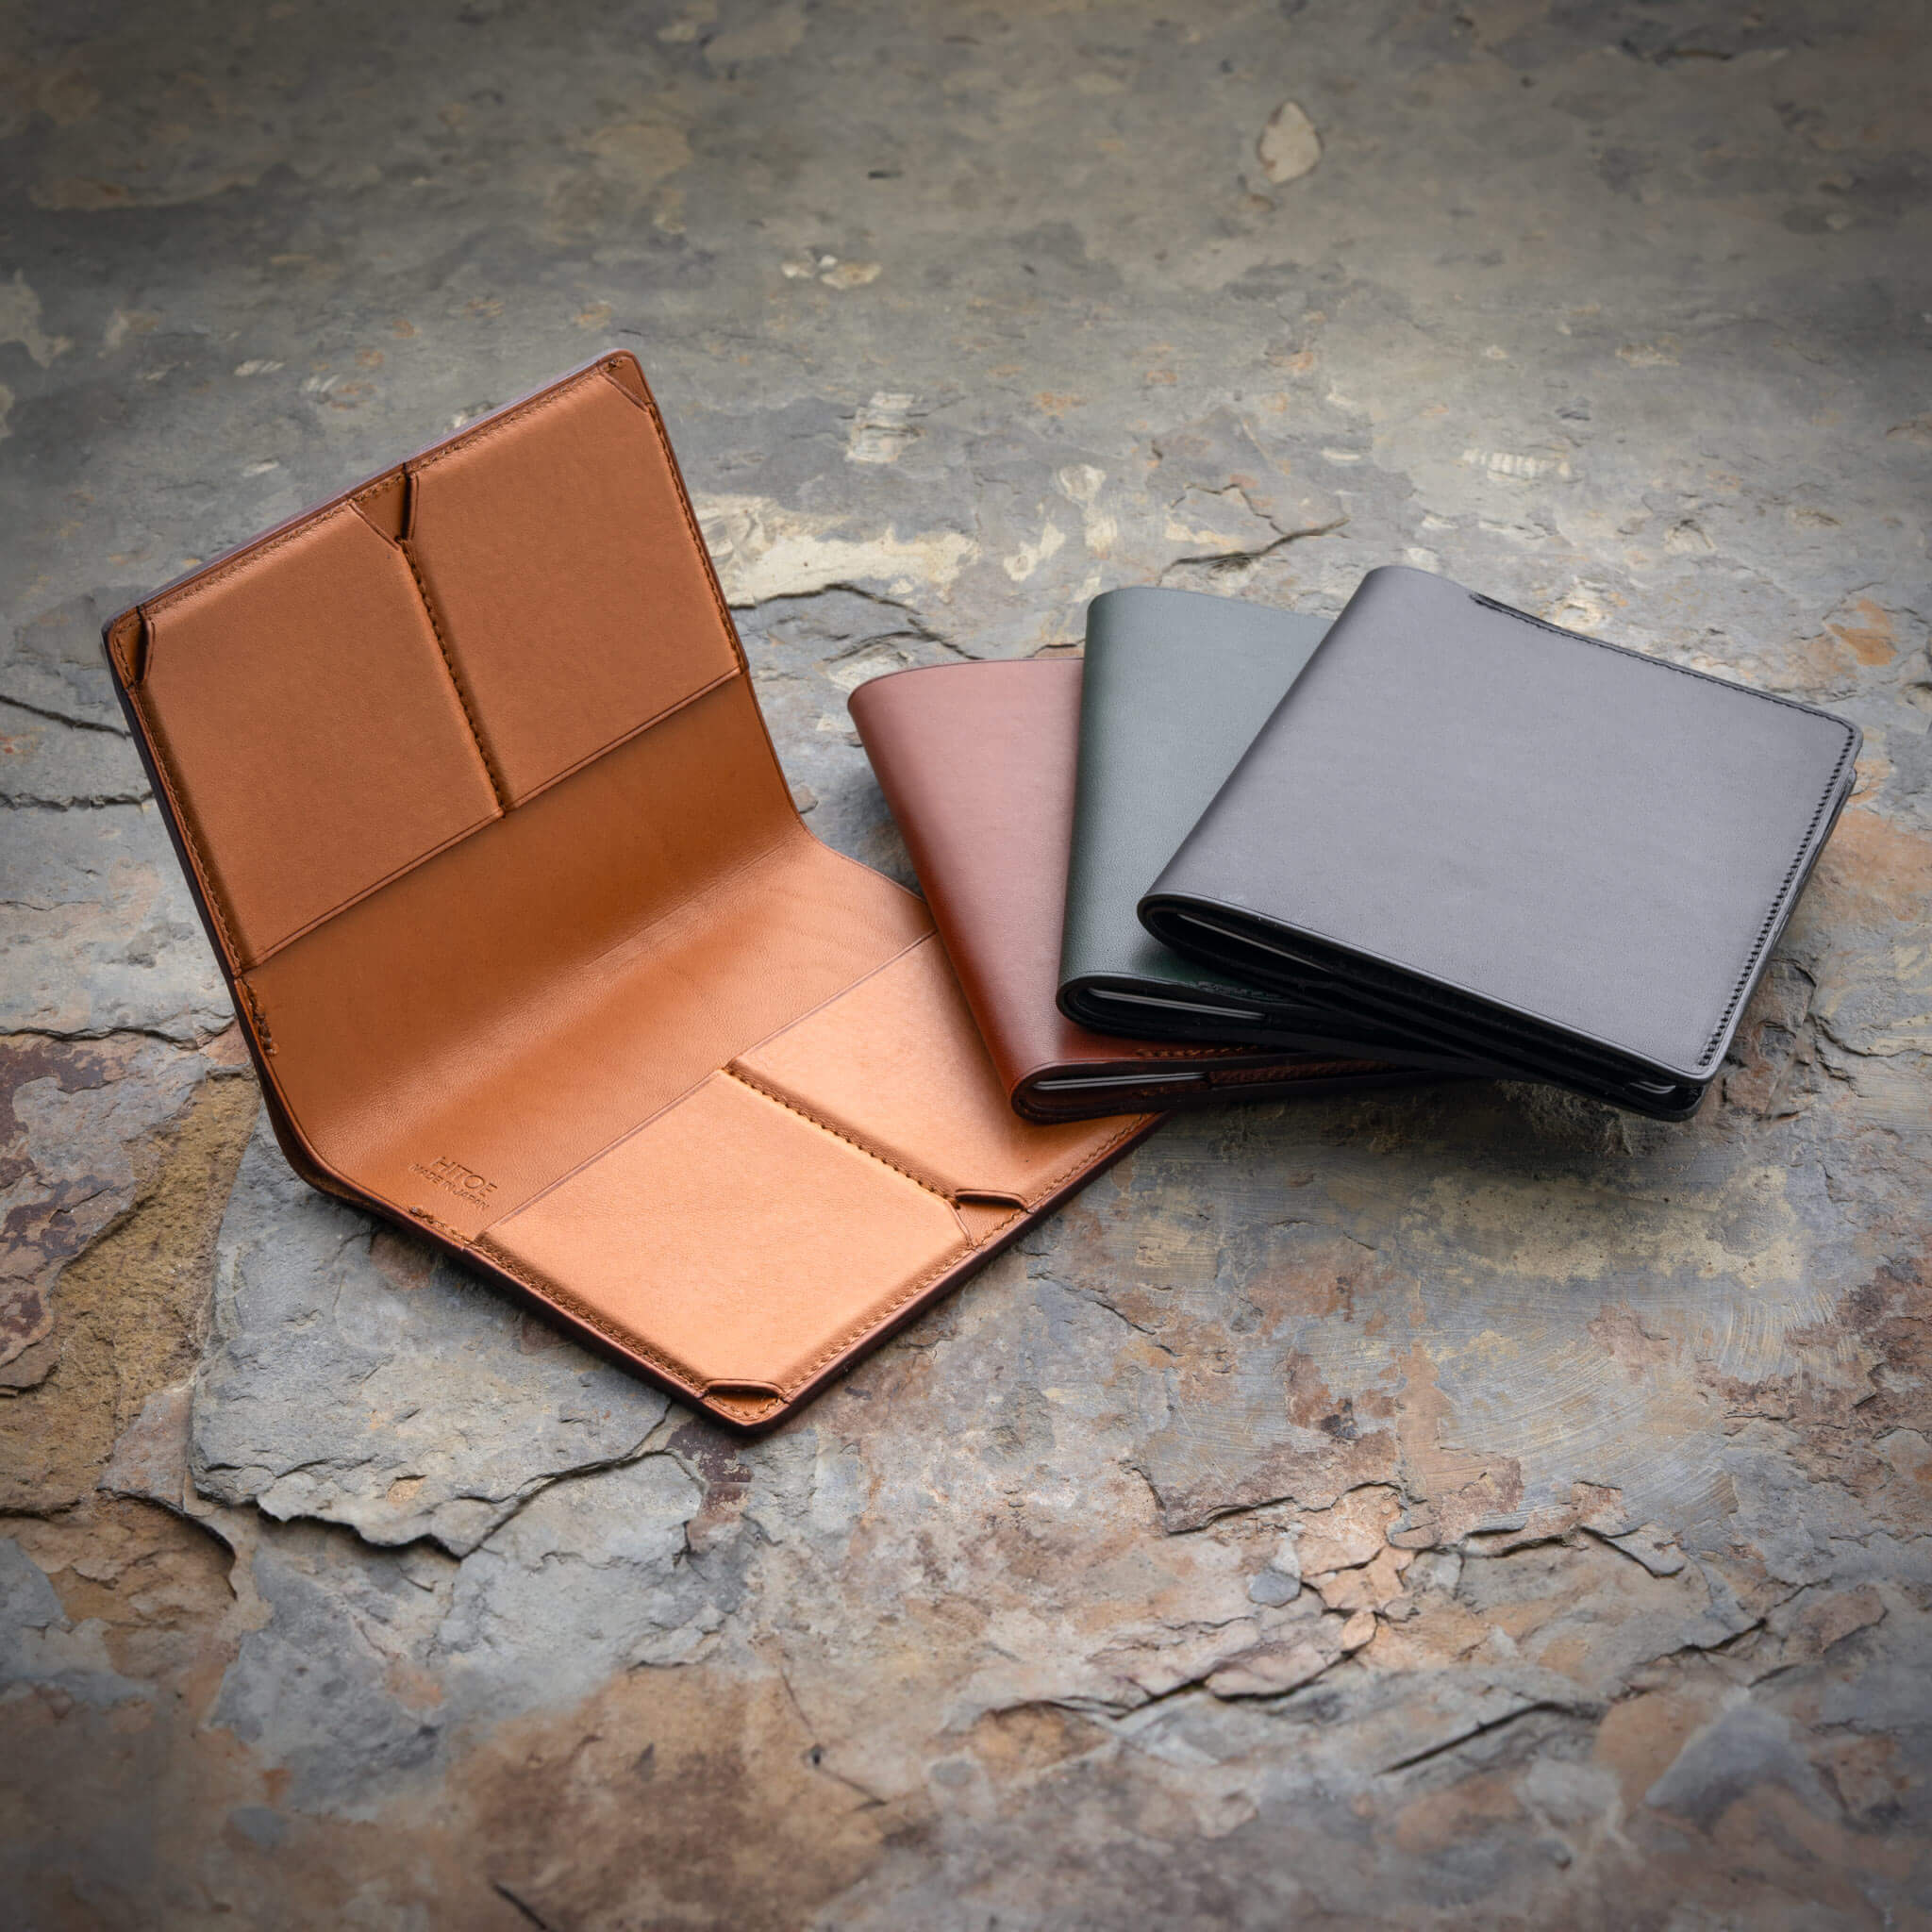 Thin wallets with minimalism at its finest.